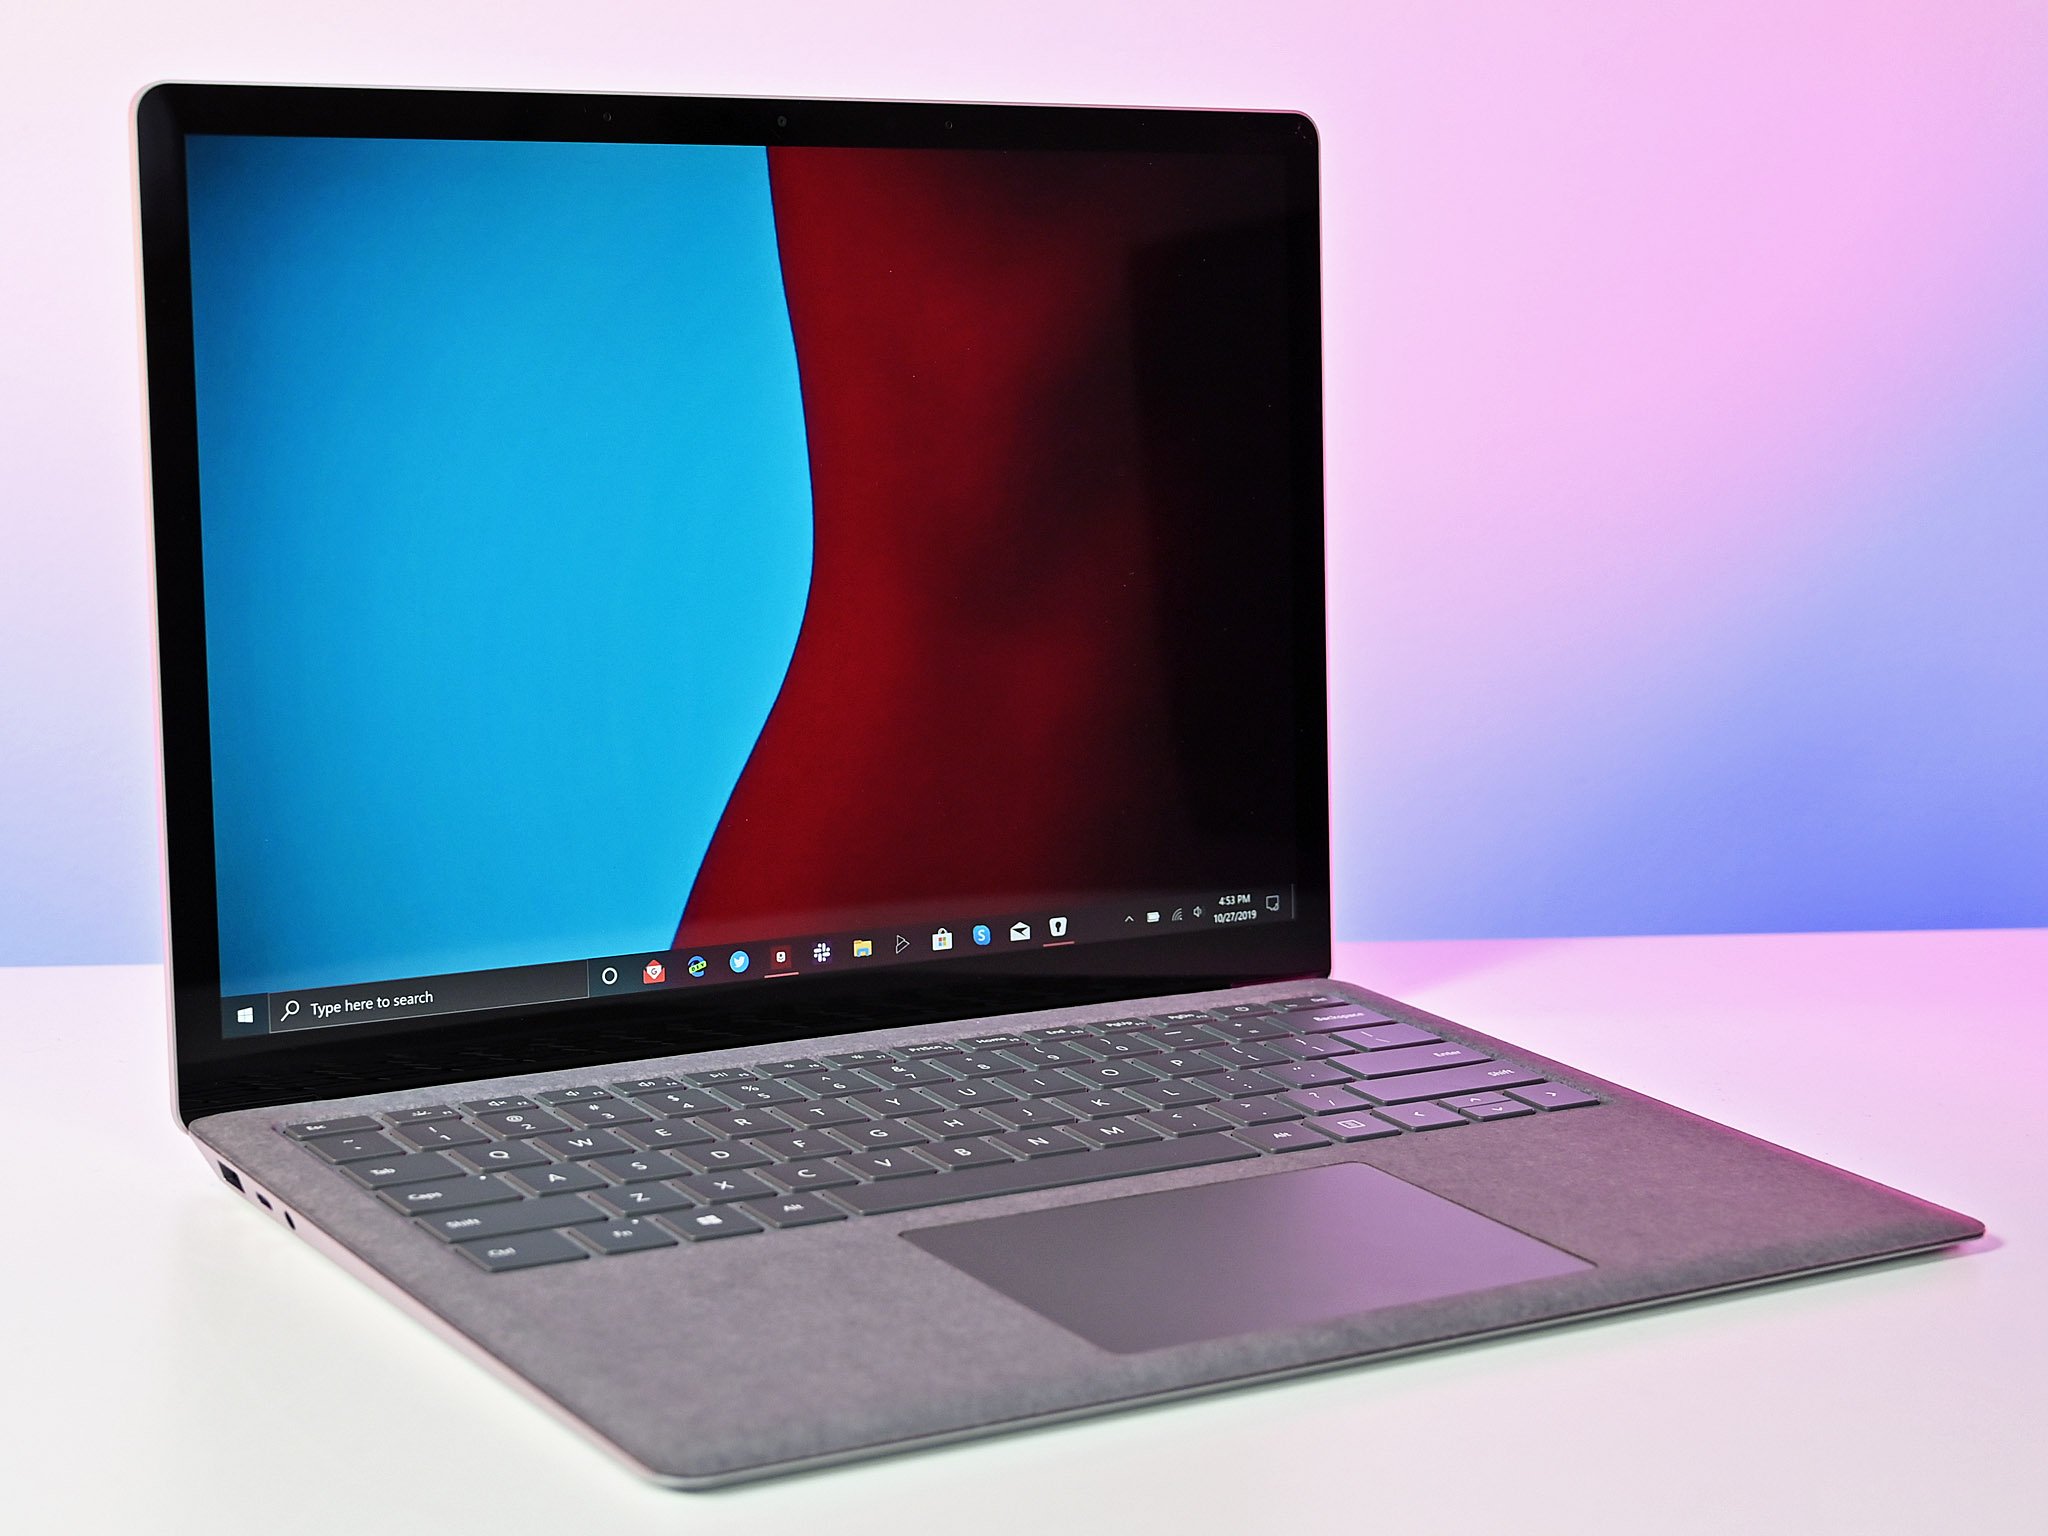 https://www.windowscentral.com/sites/wpcentral.com/files/styles/large_wm_brb/public/field/image/2019/10/surface-laptop-3-13-review-2.jpg?itok=1pRJnJyO